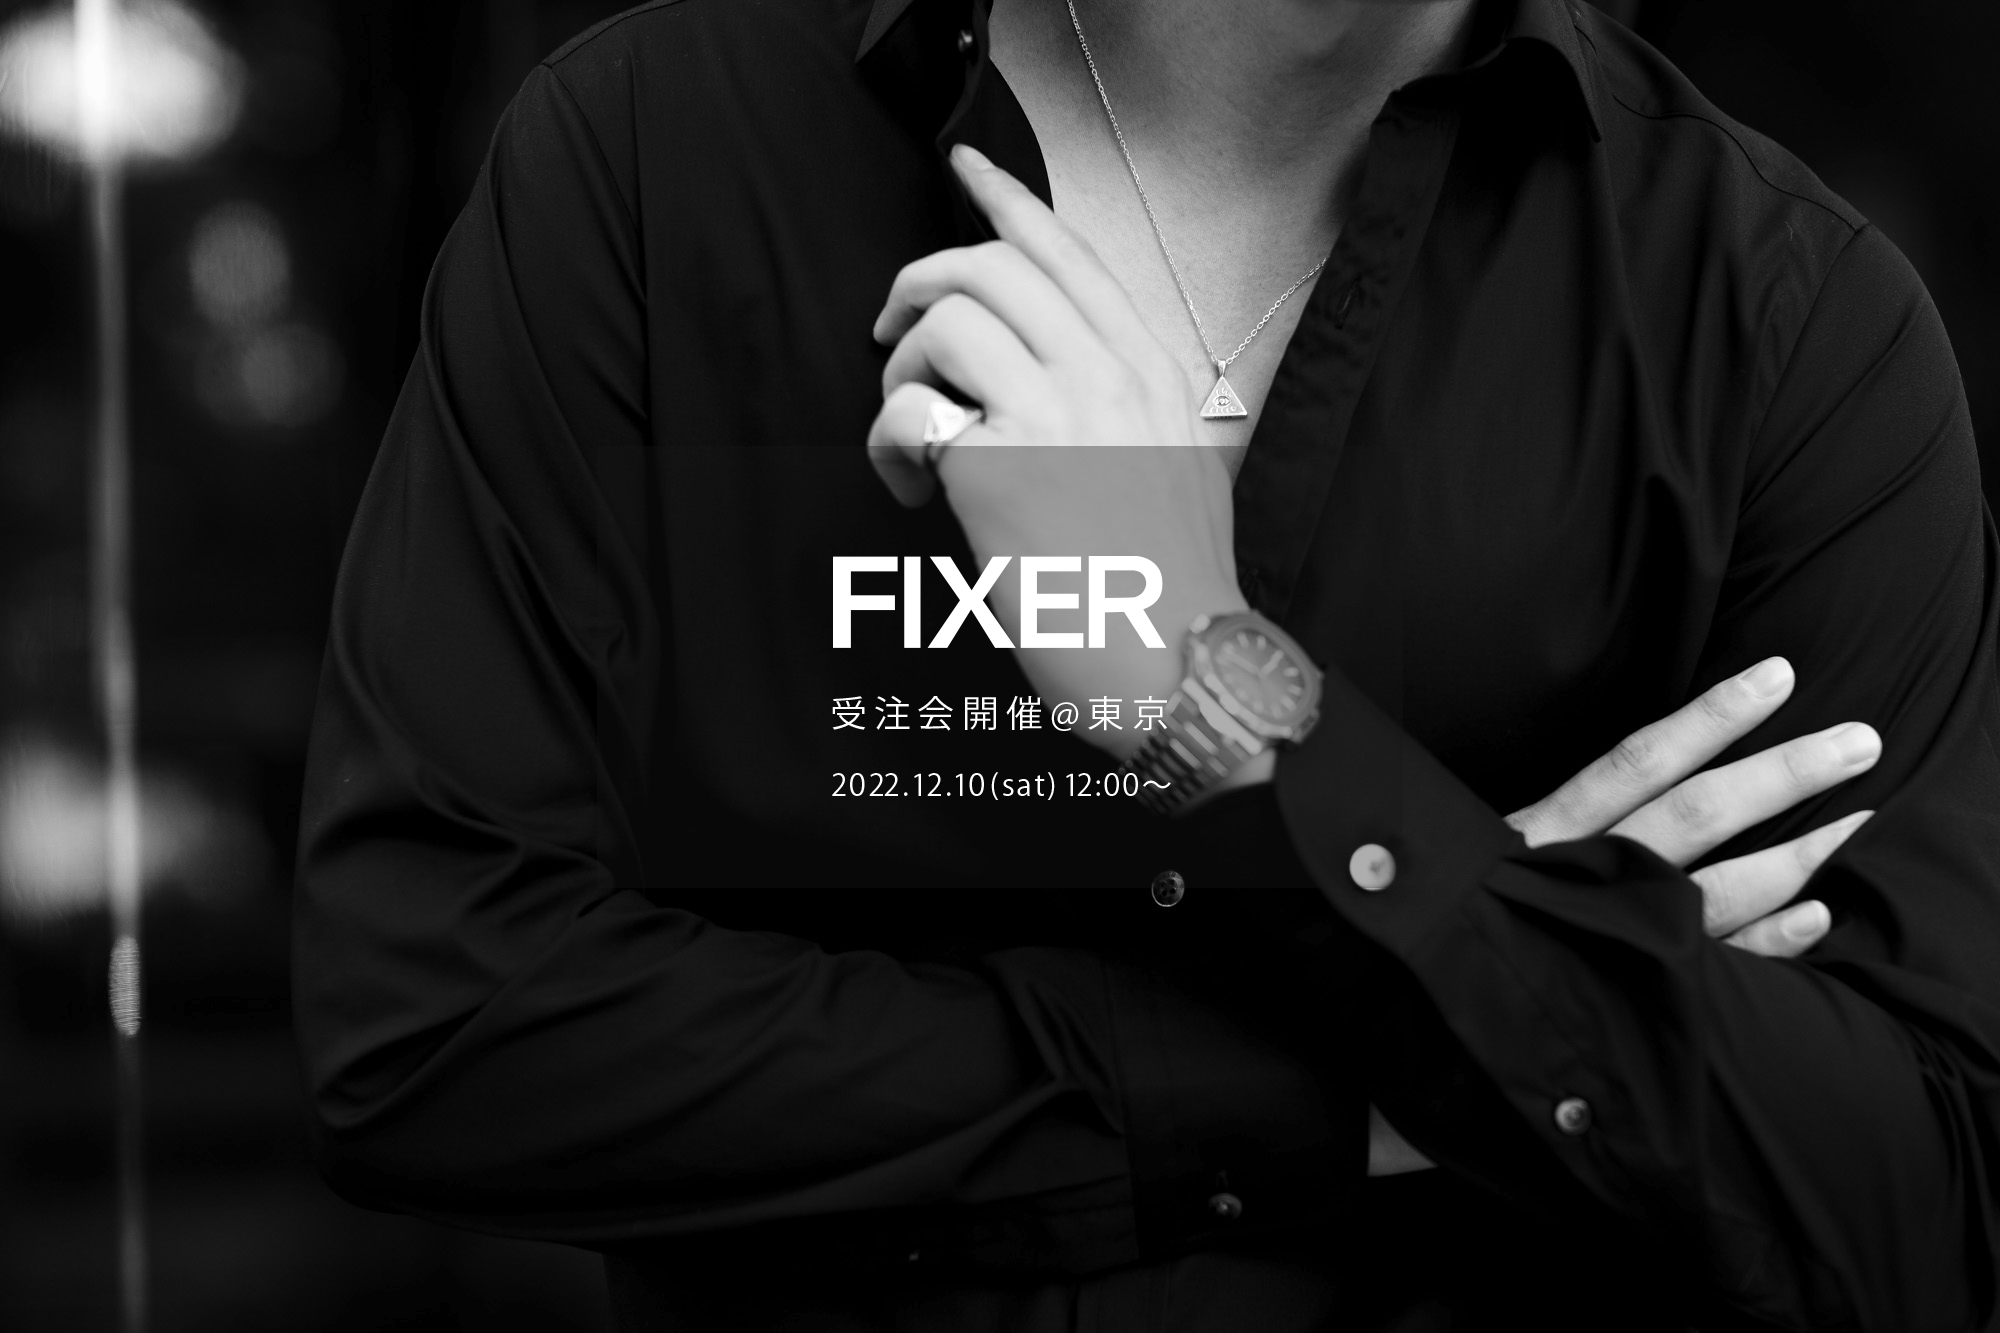 FIXER ILLUMINATI EYES NECKLACE 18K GOLD , 925 STERLING SILVER 【FIXER / フィクサー・受注会開催 @東京 / 2022.12.10(sat) 12:00～】【F1,F2,F3,F4,TOMBOY,BLACK PANTHER,FTS,FPK,ILLUMINATI EYES RING,PATHER RING,ILLUMINATI EYES NECKLACE,COMPASS & RULER NECKLACE,FWC】愛知 名古屋 Alto e Diritto altoediritto アルトエデリット ダブルライダース シングルライダース レザーテーラード トムボーイ サングラス ブラックパンサー Tシャツ ハービー山口 パーカー ブレスレット ウォレット リバース 東京限定 イルミナティアイズリング ブラックパンサー ネックレス コンパスルーラーネックレス キーチェーン ウォレットチェーン